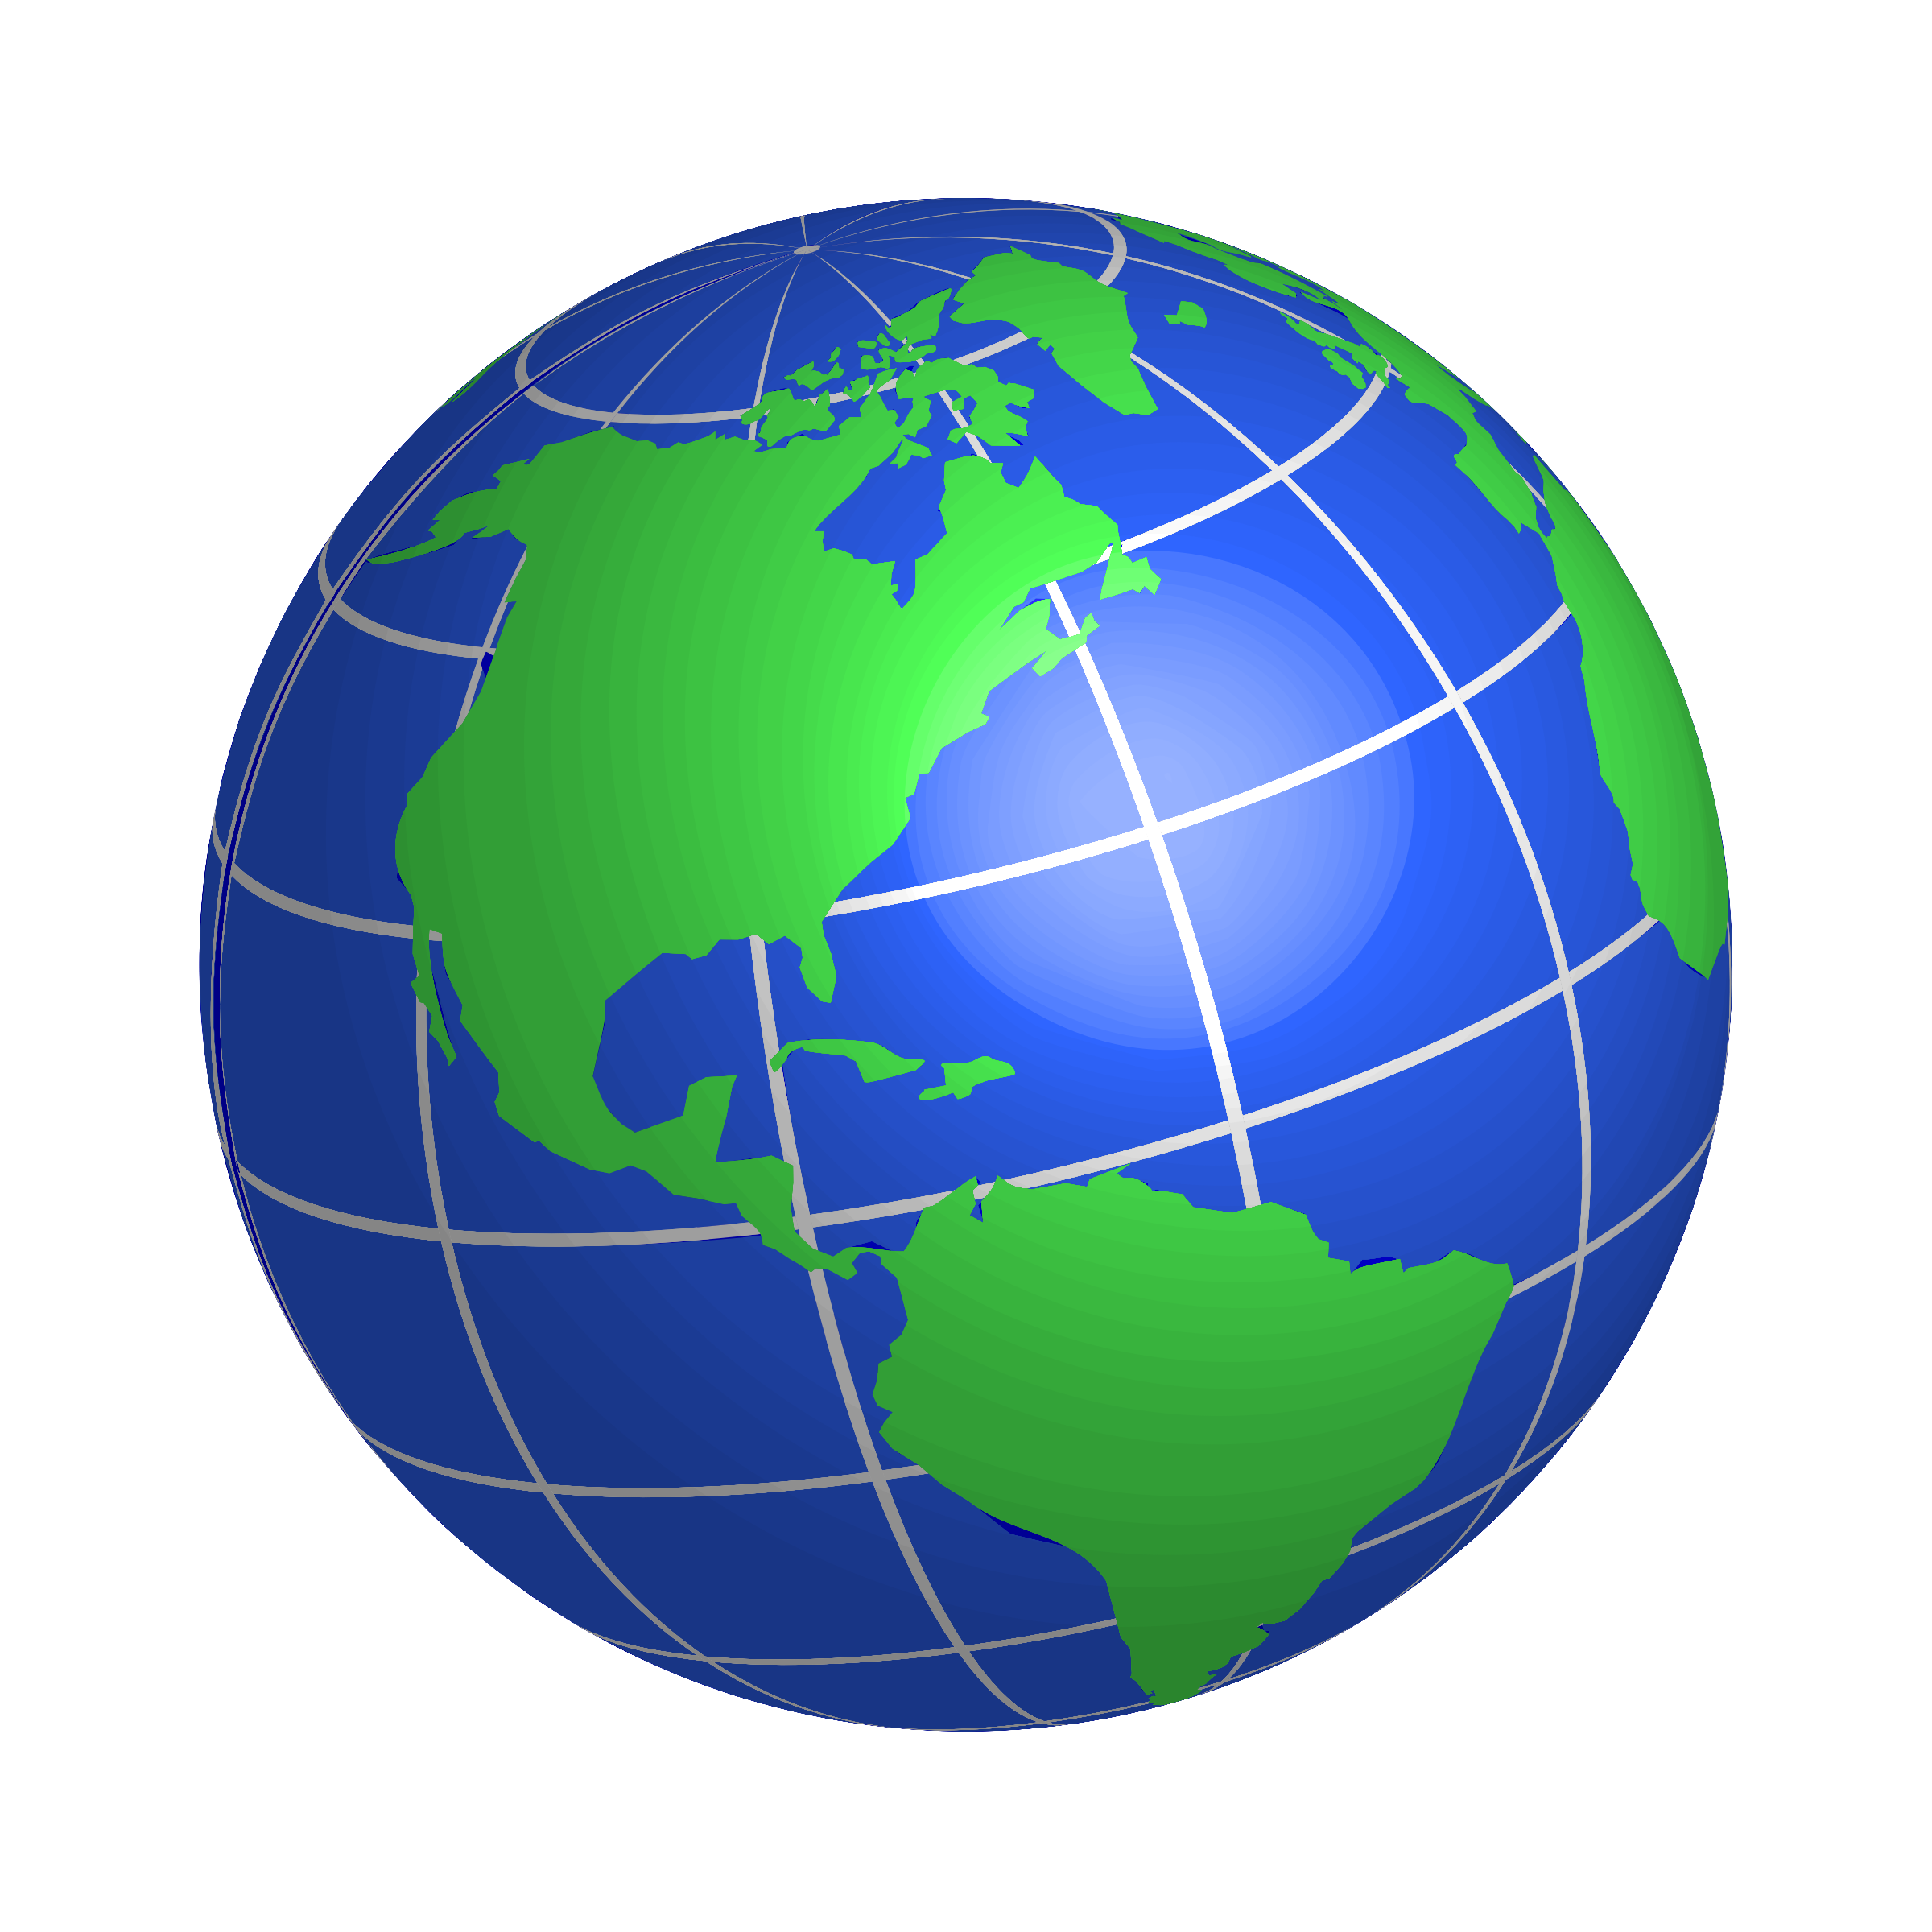 Globe Earth Png Images Globe Clipart Free Download Free Transparent Png Logos